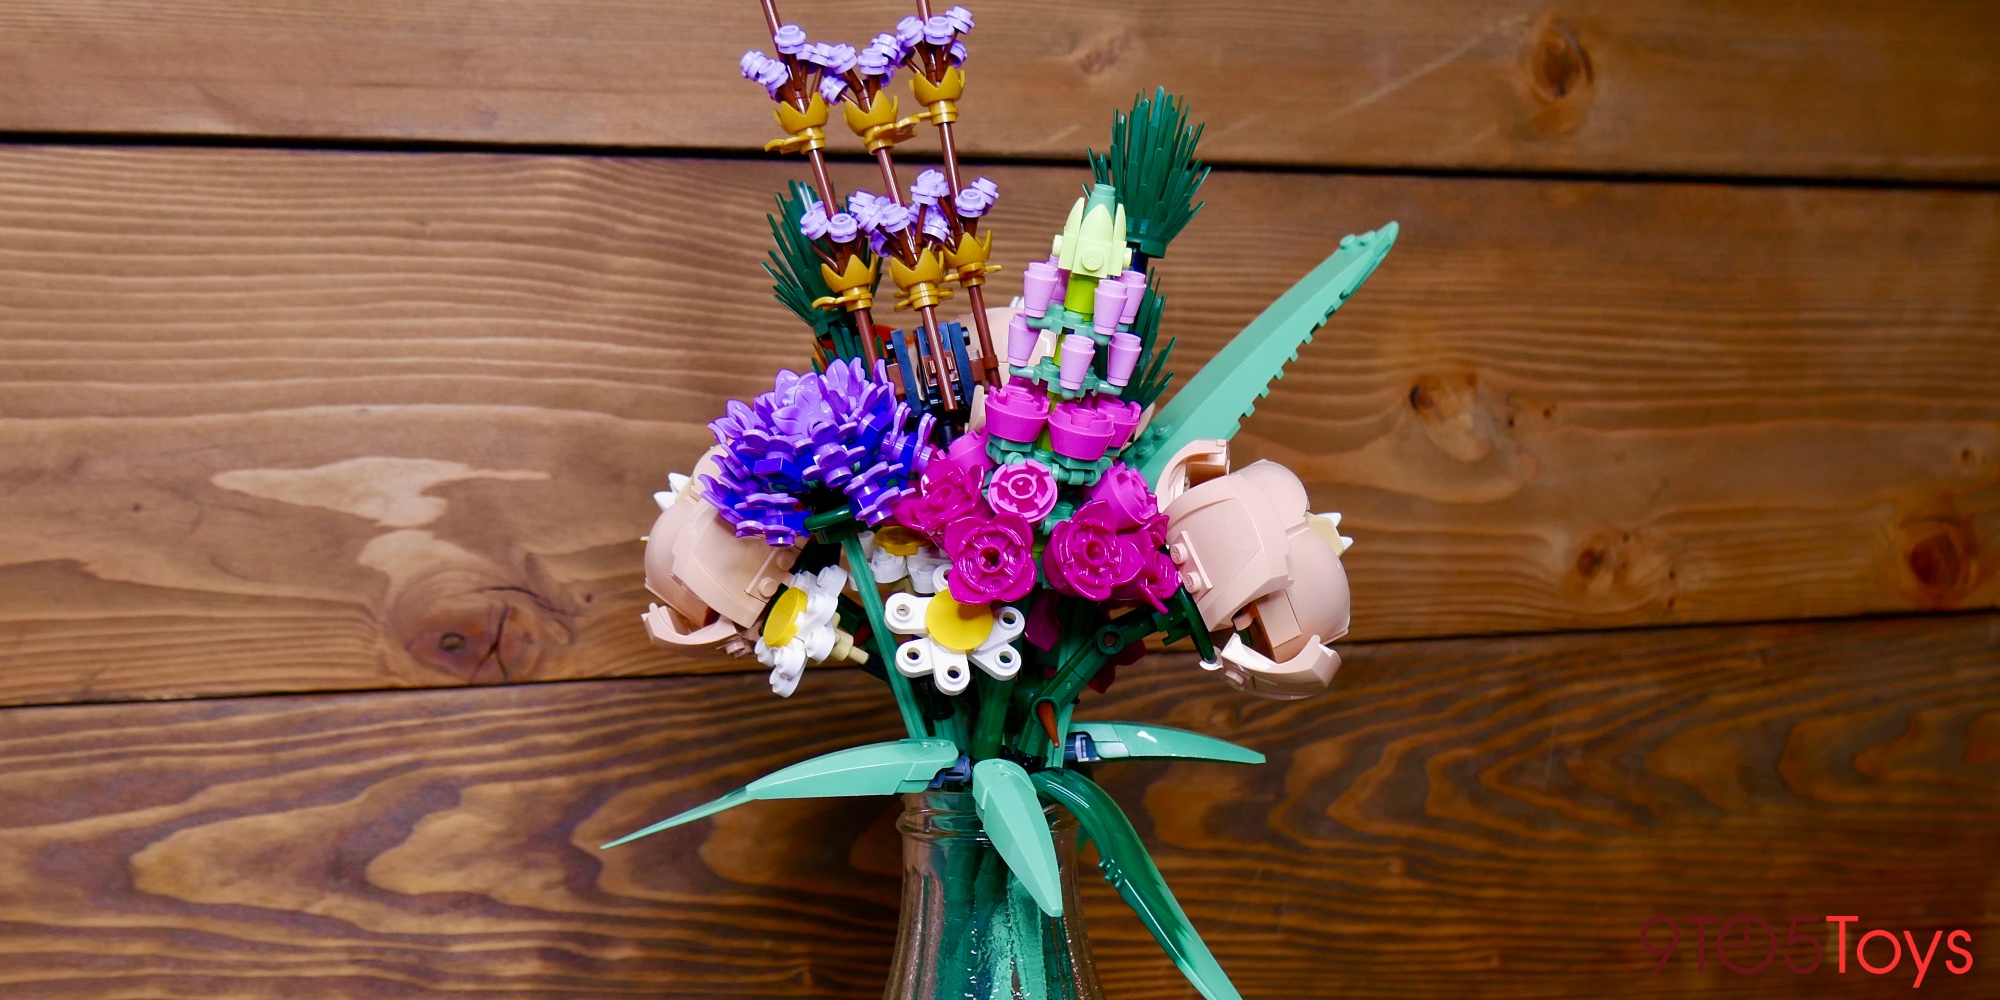 LEGO's new Flower Bouquet is on sale for one of the first times at $47 ...